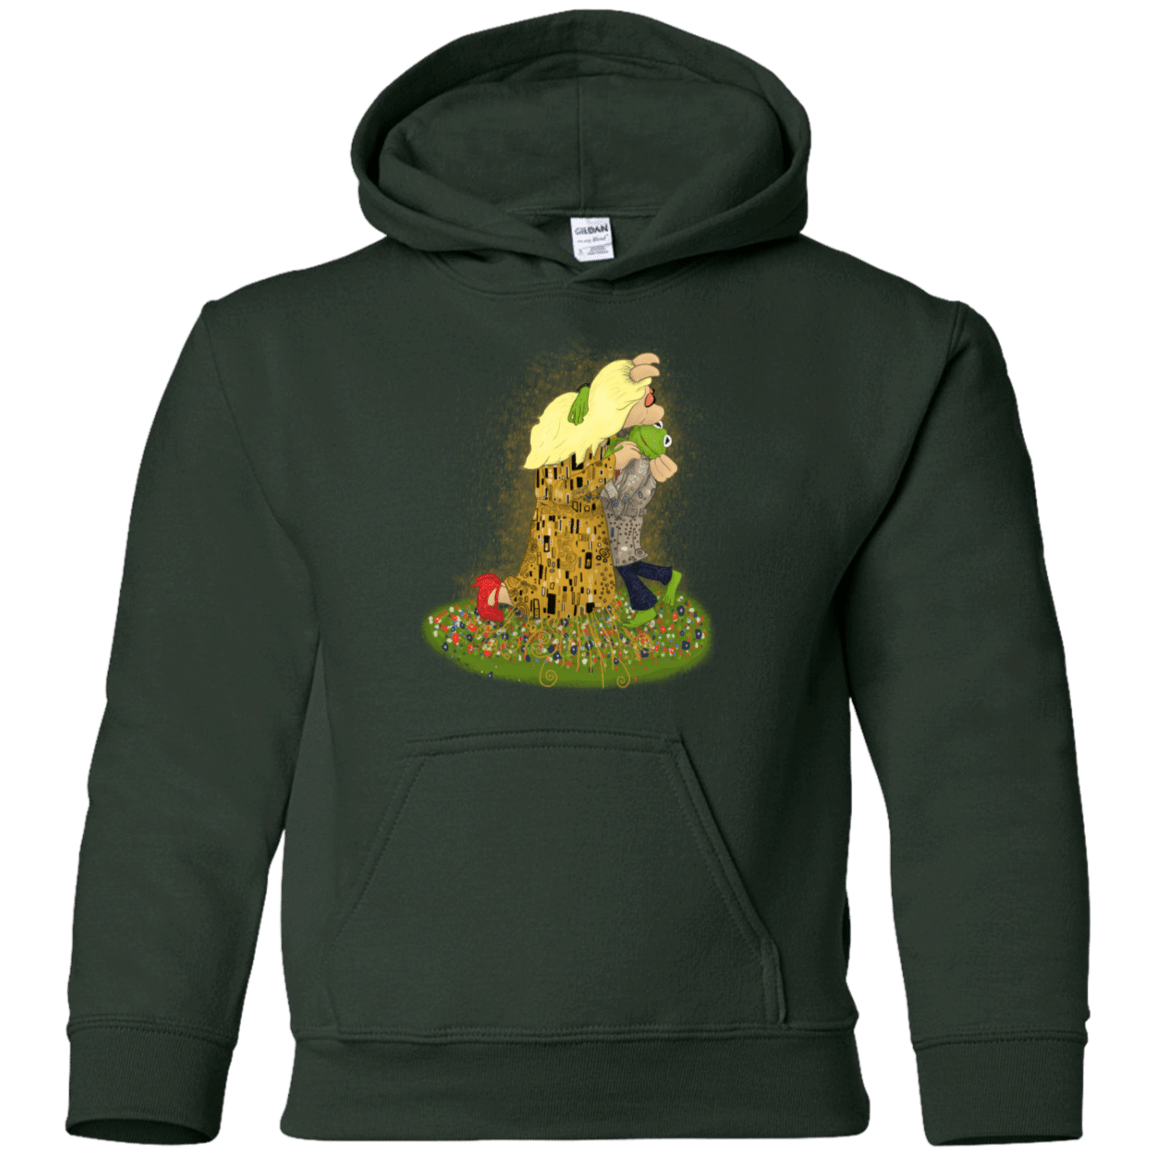 Sweatshirts Forest Green / YS Kiss of Muppets Youth Hoodie